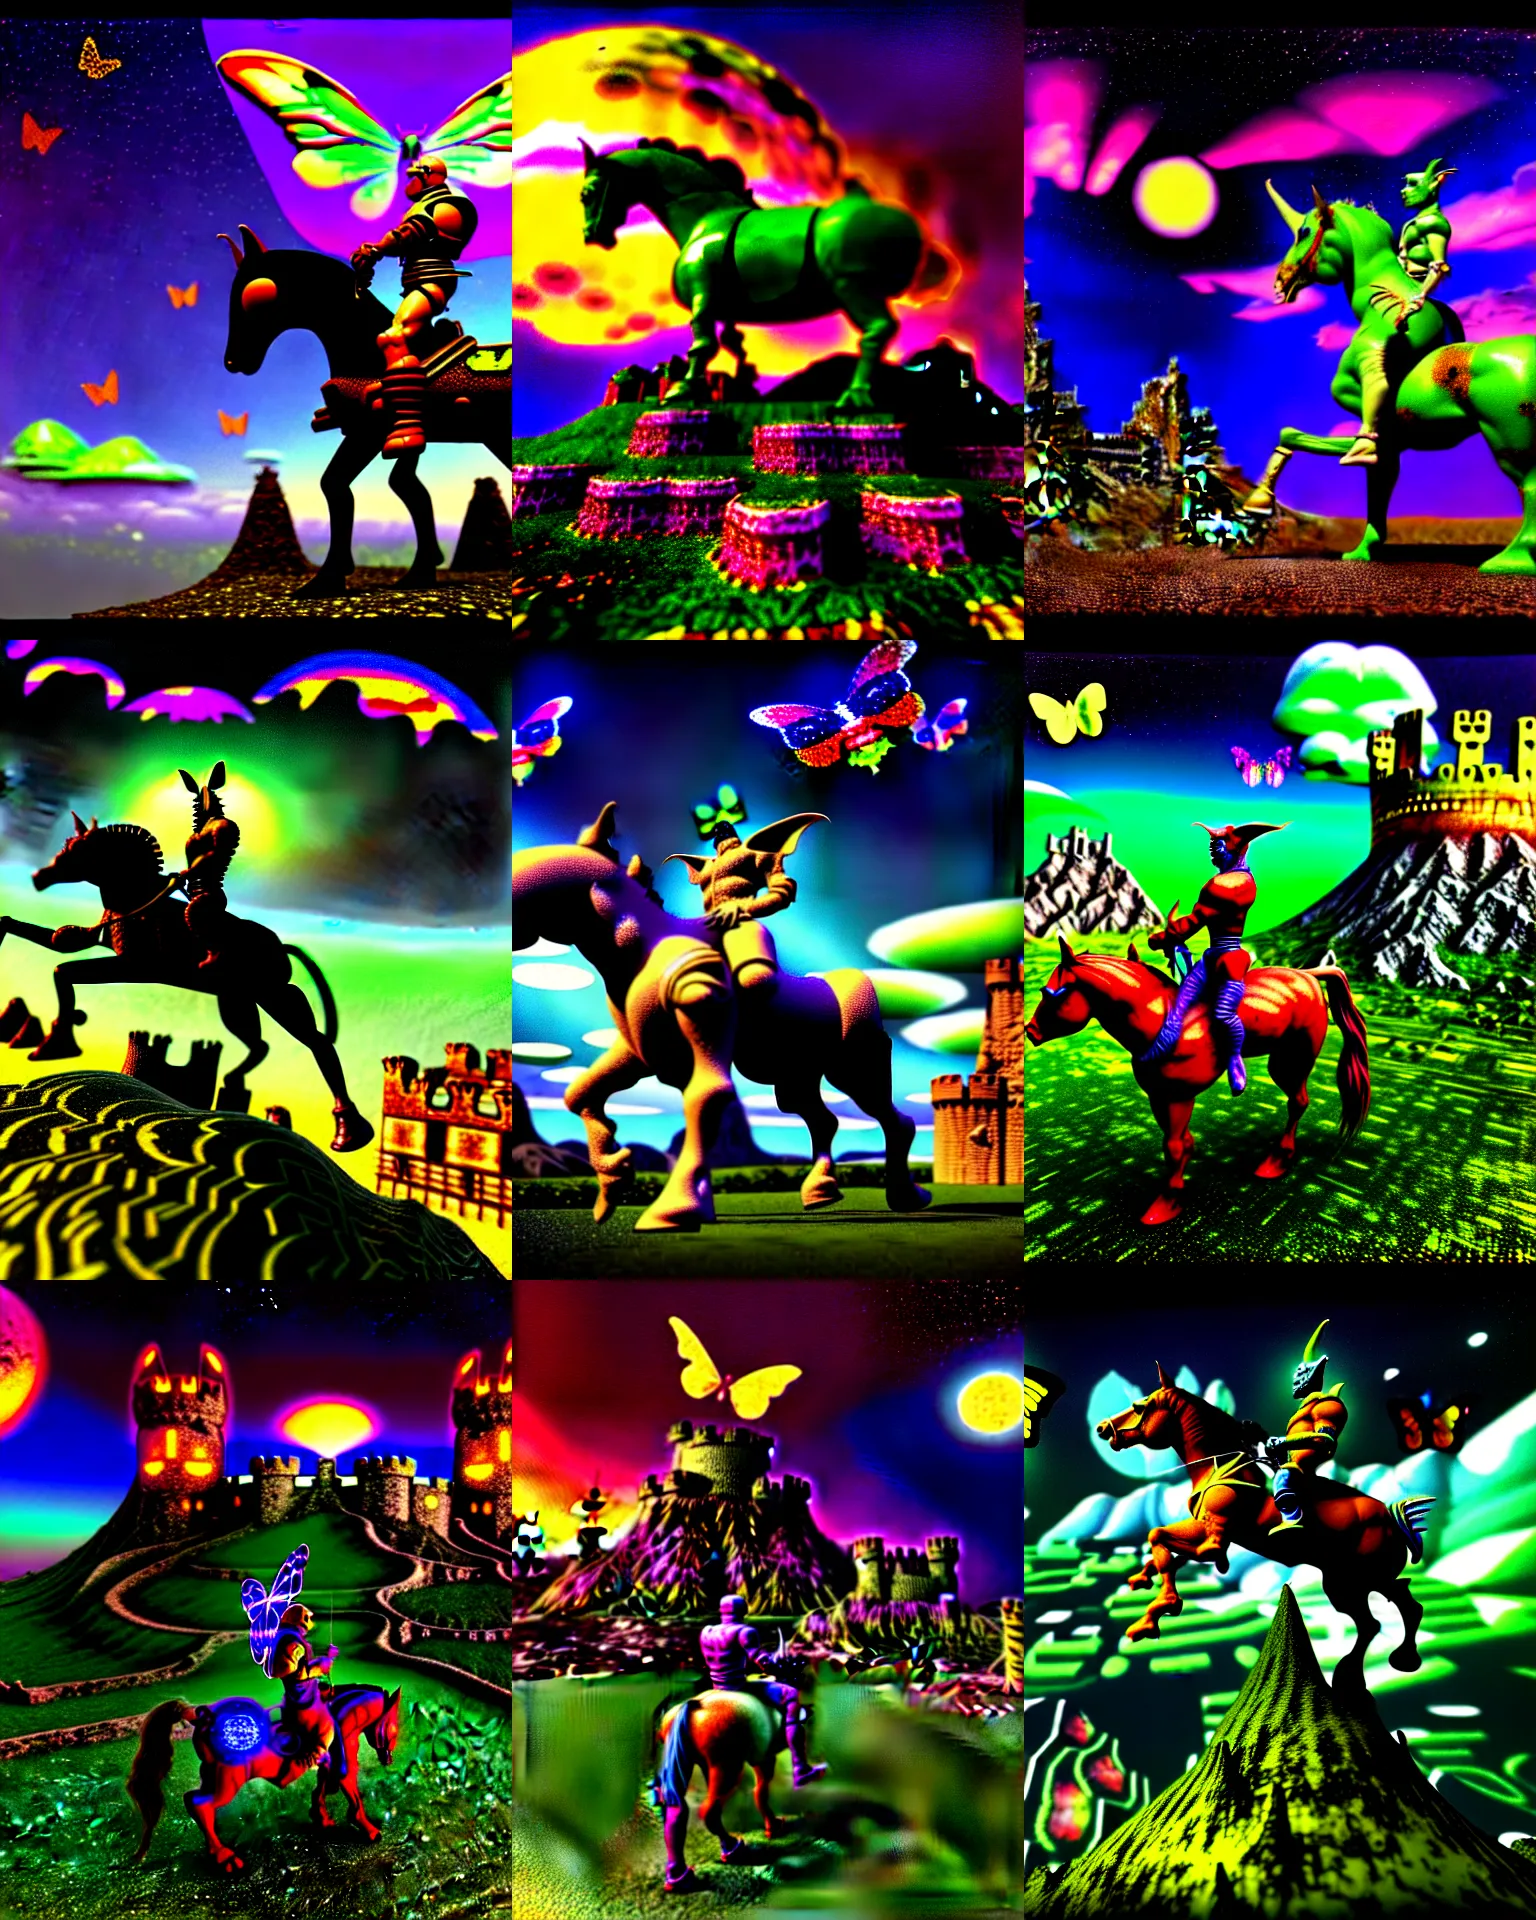 Prompt: 3 d render of cyborg goblin riding a horse standing in cybernetic mountain landscape castle ruins against a psychedelic surreal background with 3 d butterflies and 3 d flowers n the style of 1 9 9 0's cg graphics against the cloudy night sky, psx graphics, 3 do magazine, medium close shot